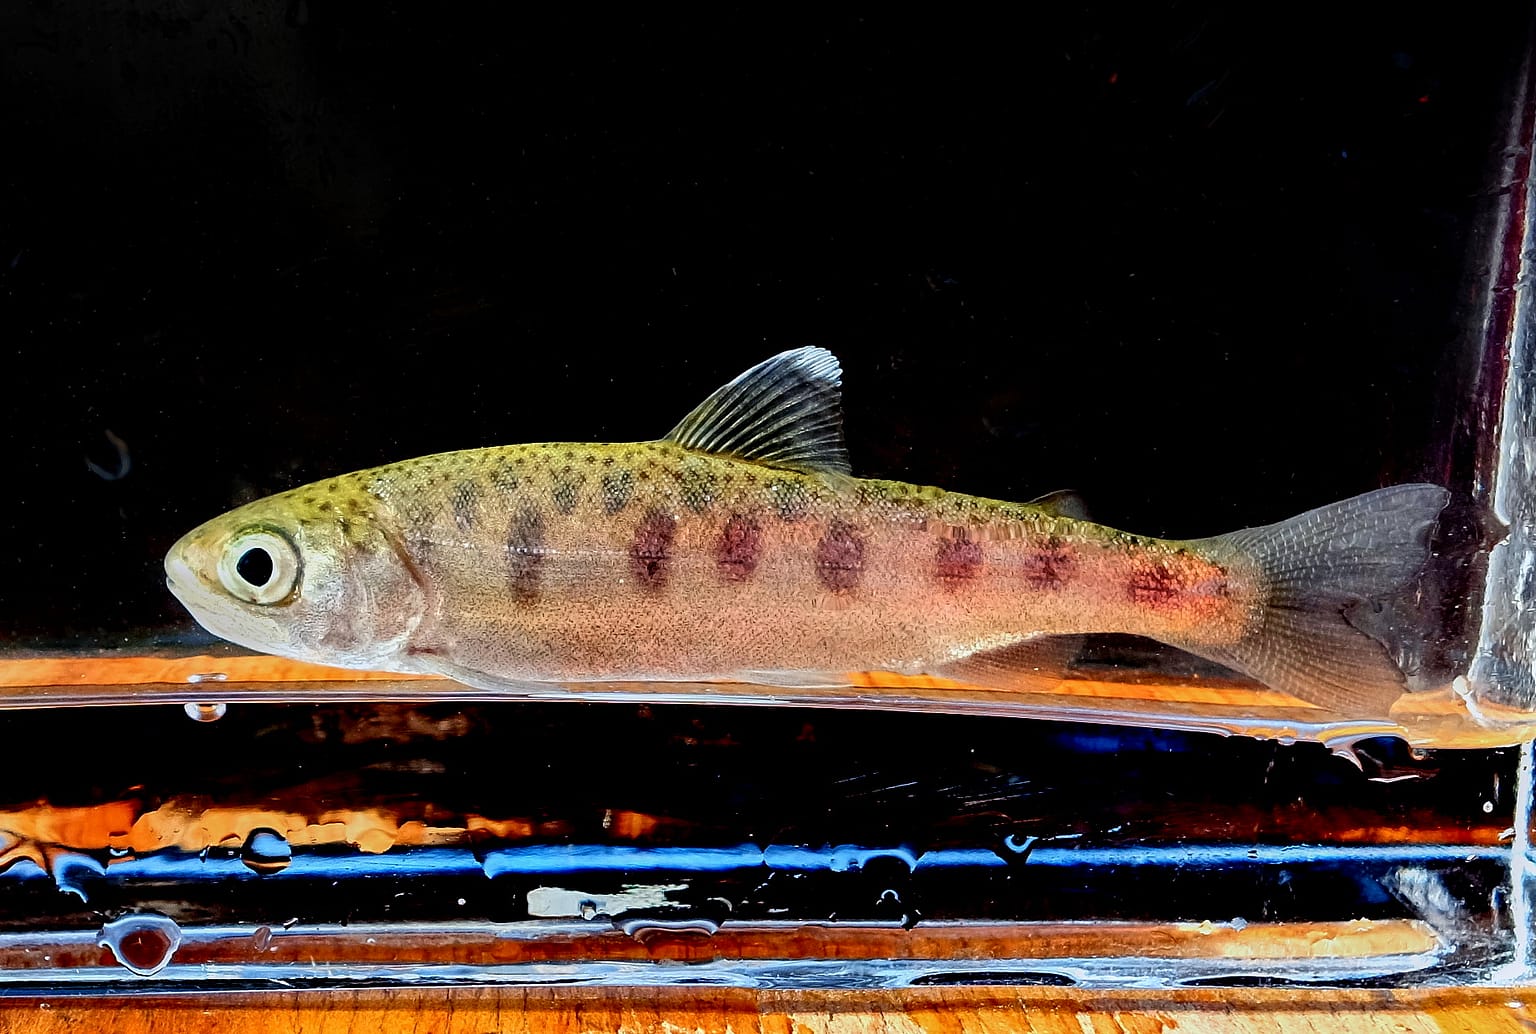 A wild baby Chinook salmon, three inches long, from a small California creek, miles from the ocean, being measured before release back into the forest water.